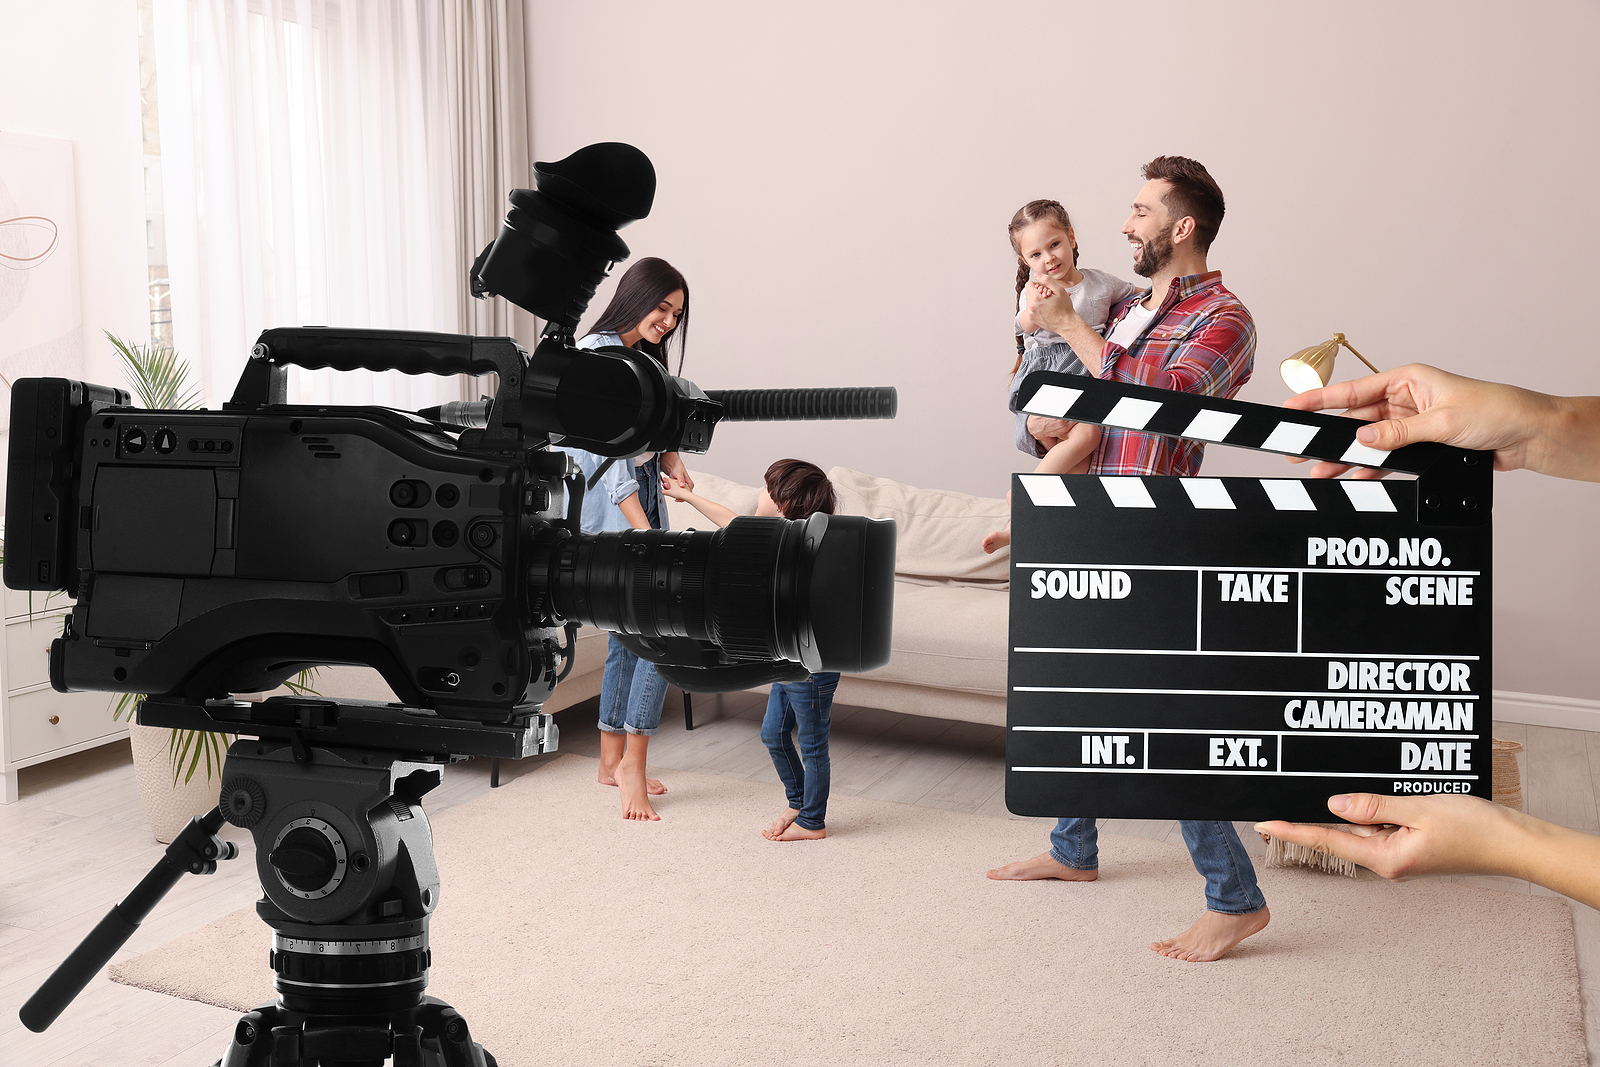 Shooting movie. Second assistant camera holding clapperboard near video camera in front of happy family (actors) at home (film set)